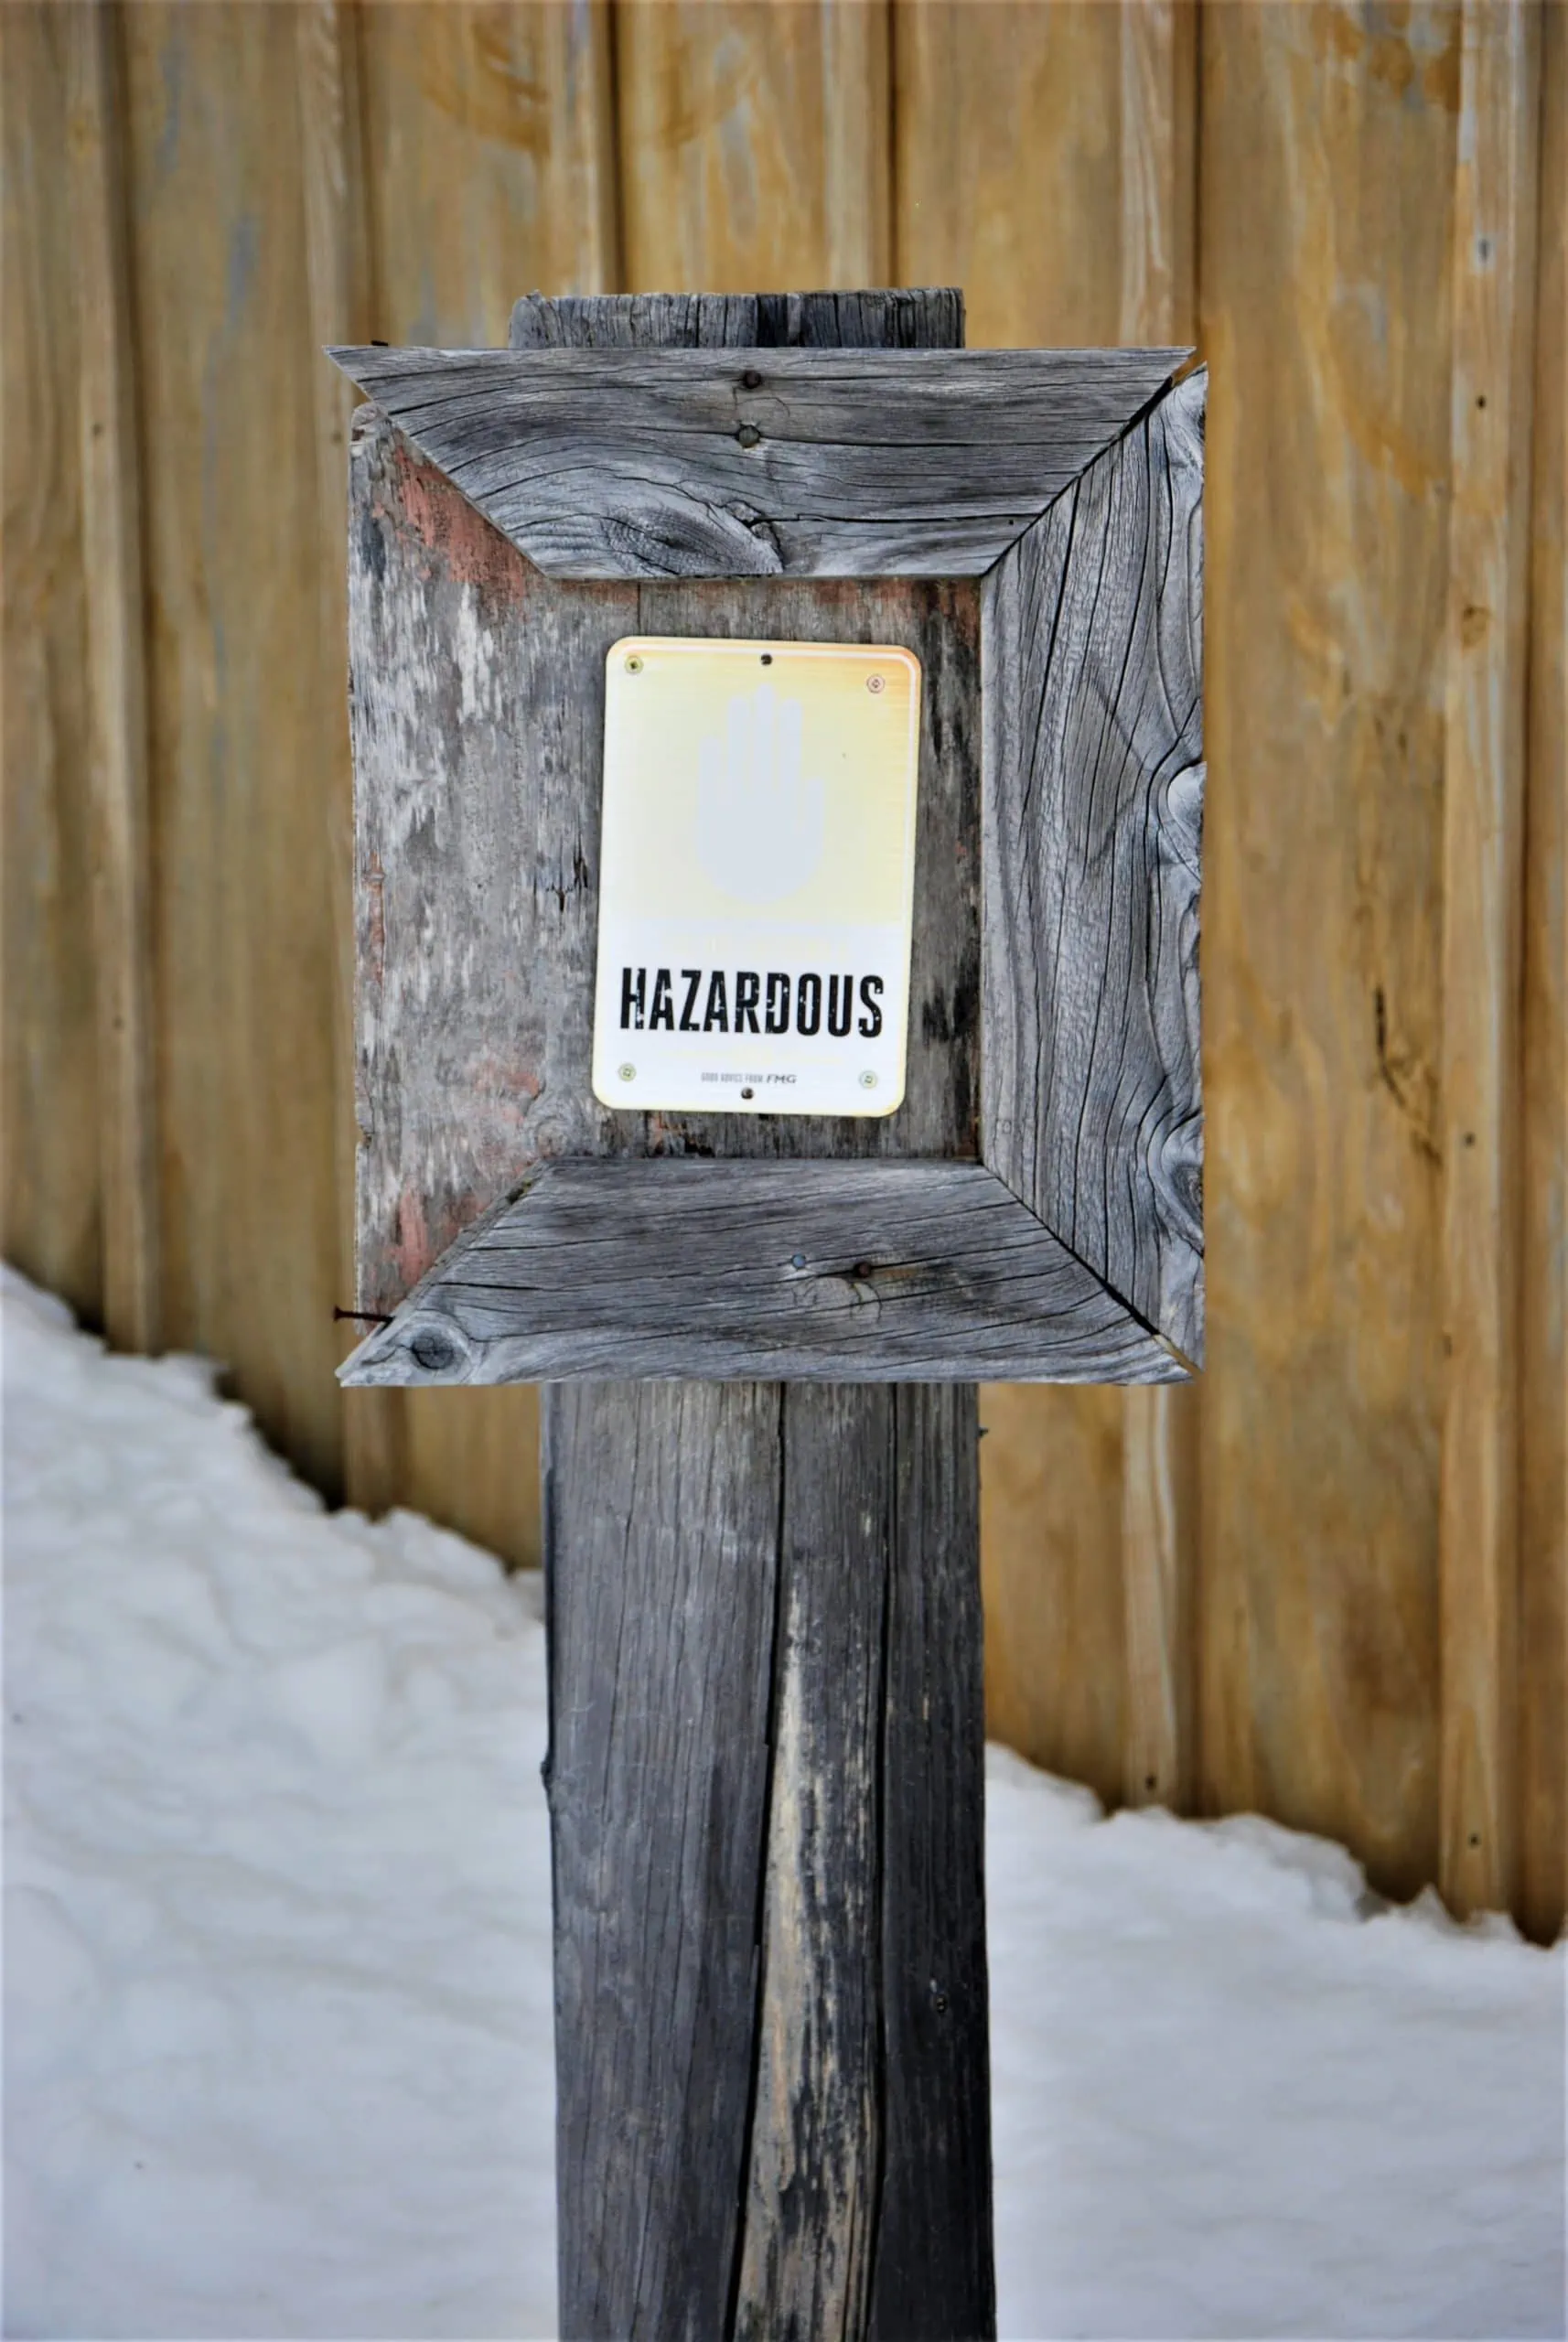 Signpost indicating hazardous conditions on job site that are monitored by construction security camera